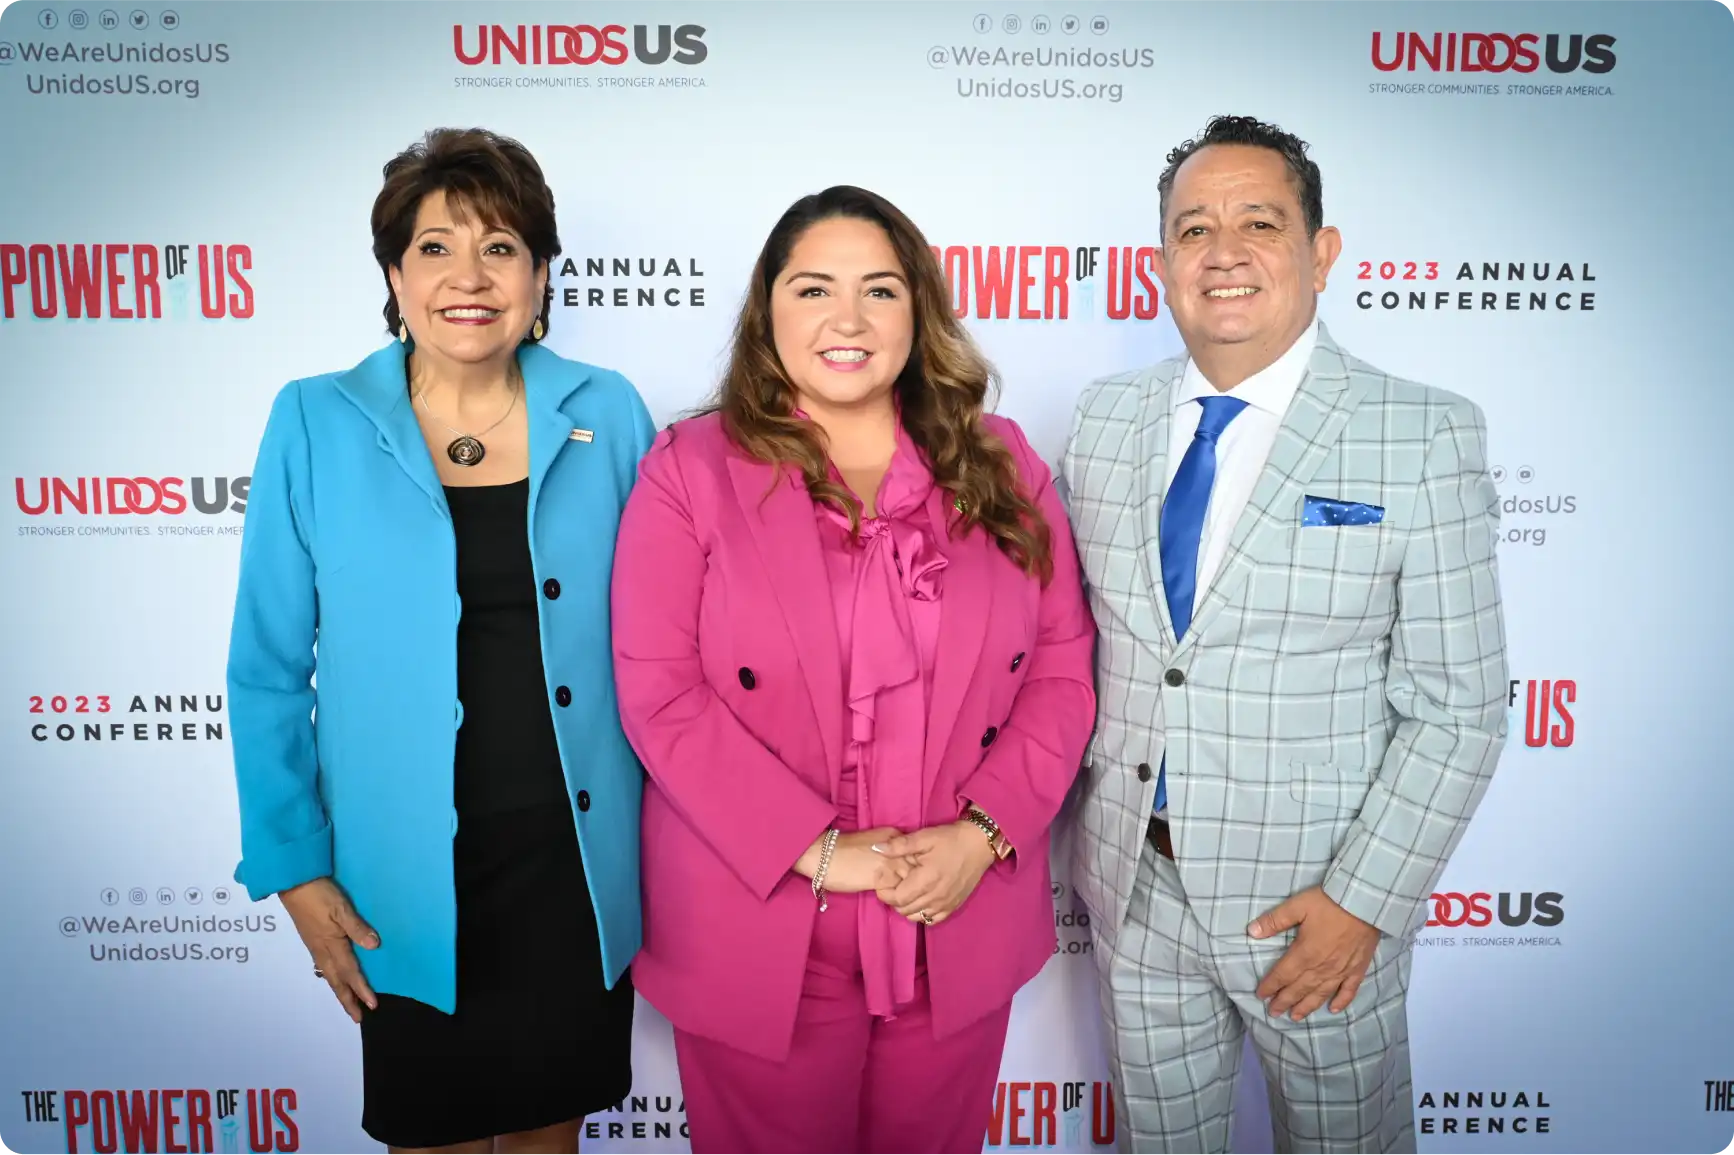 From left to right: UnidosUS President and CEO Janet Murguía, Representative Delia Ramirez (IL, 3rd District), and Chair of the UnidosUS Board of Directors Luis Granados.